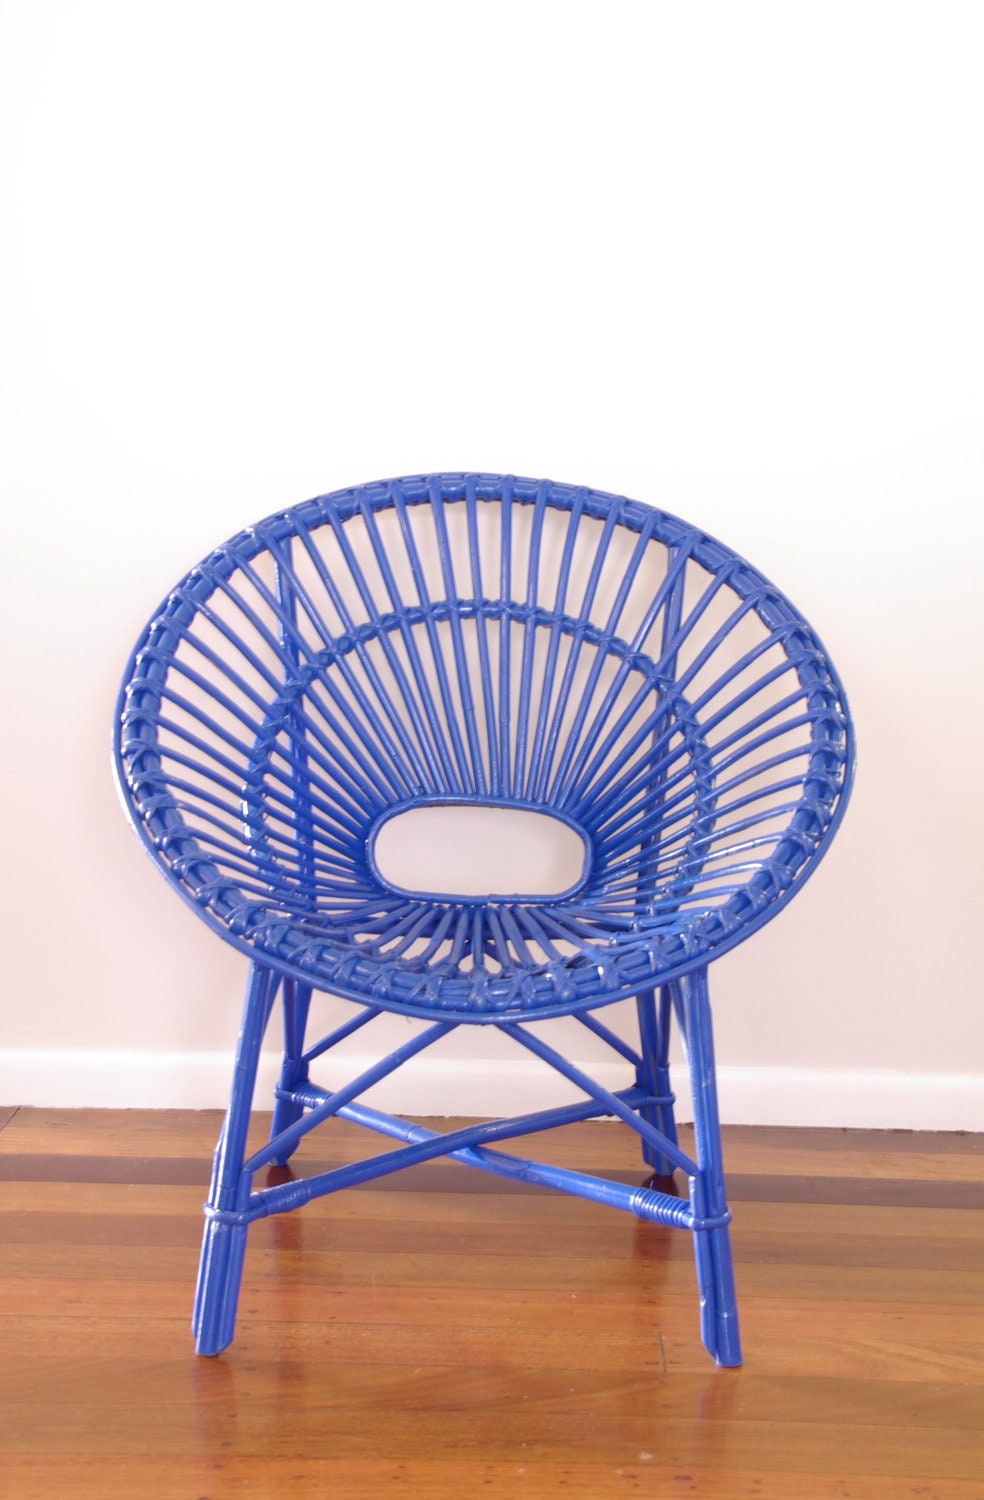 CUSTOM Upcycled Vintage Cane Saucer Chair - NeonVintageDesign